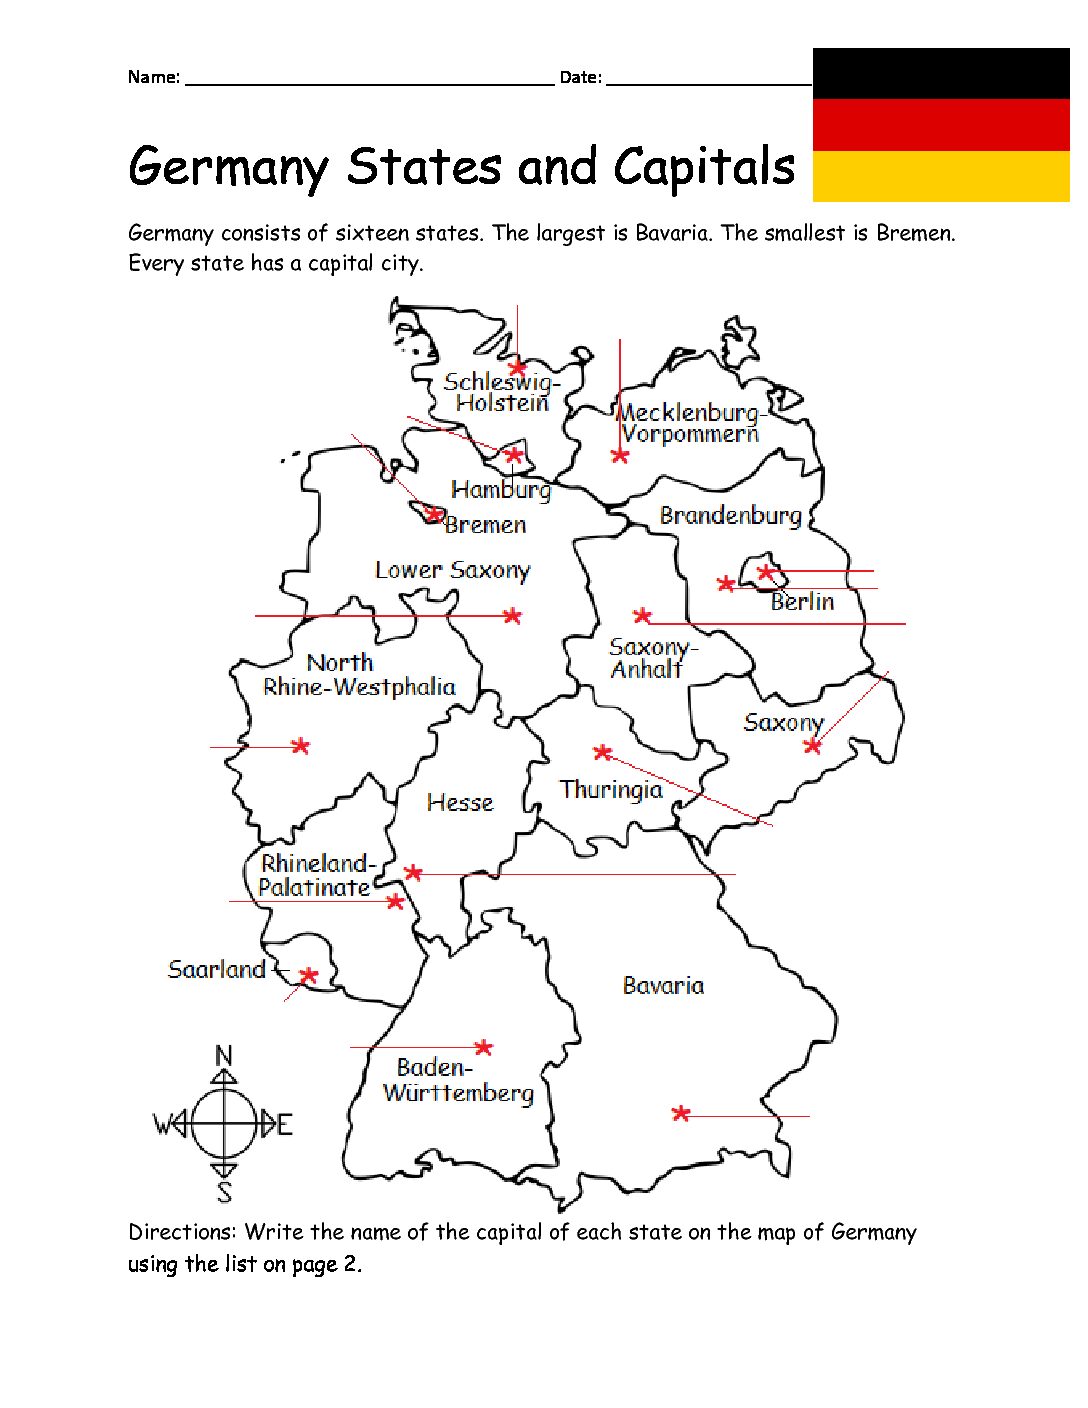 Germany States and Capitals Printable Worksheet